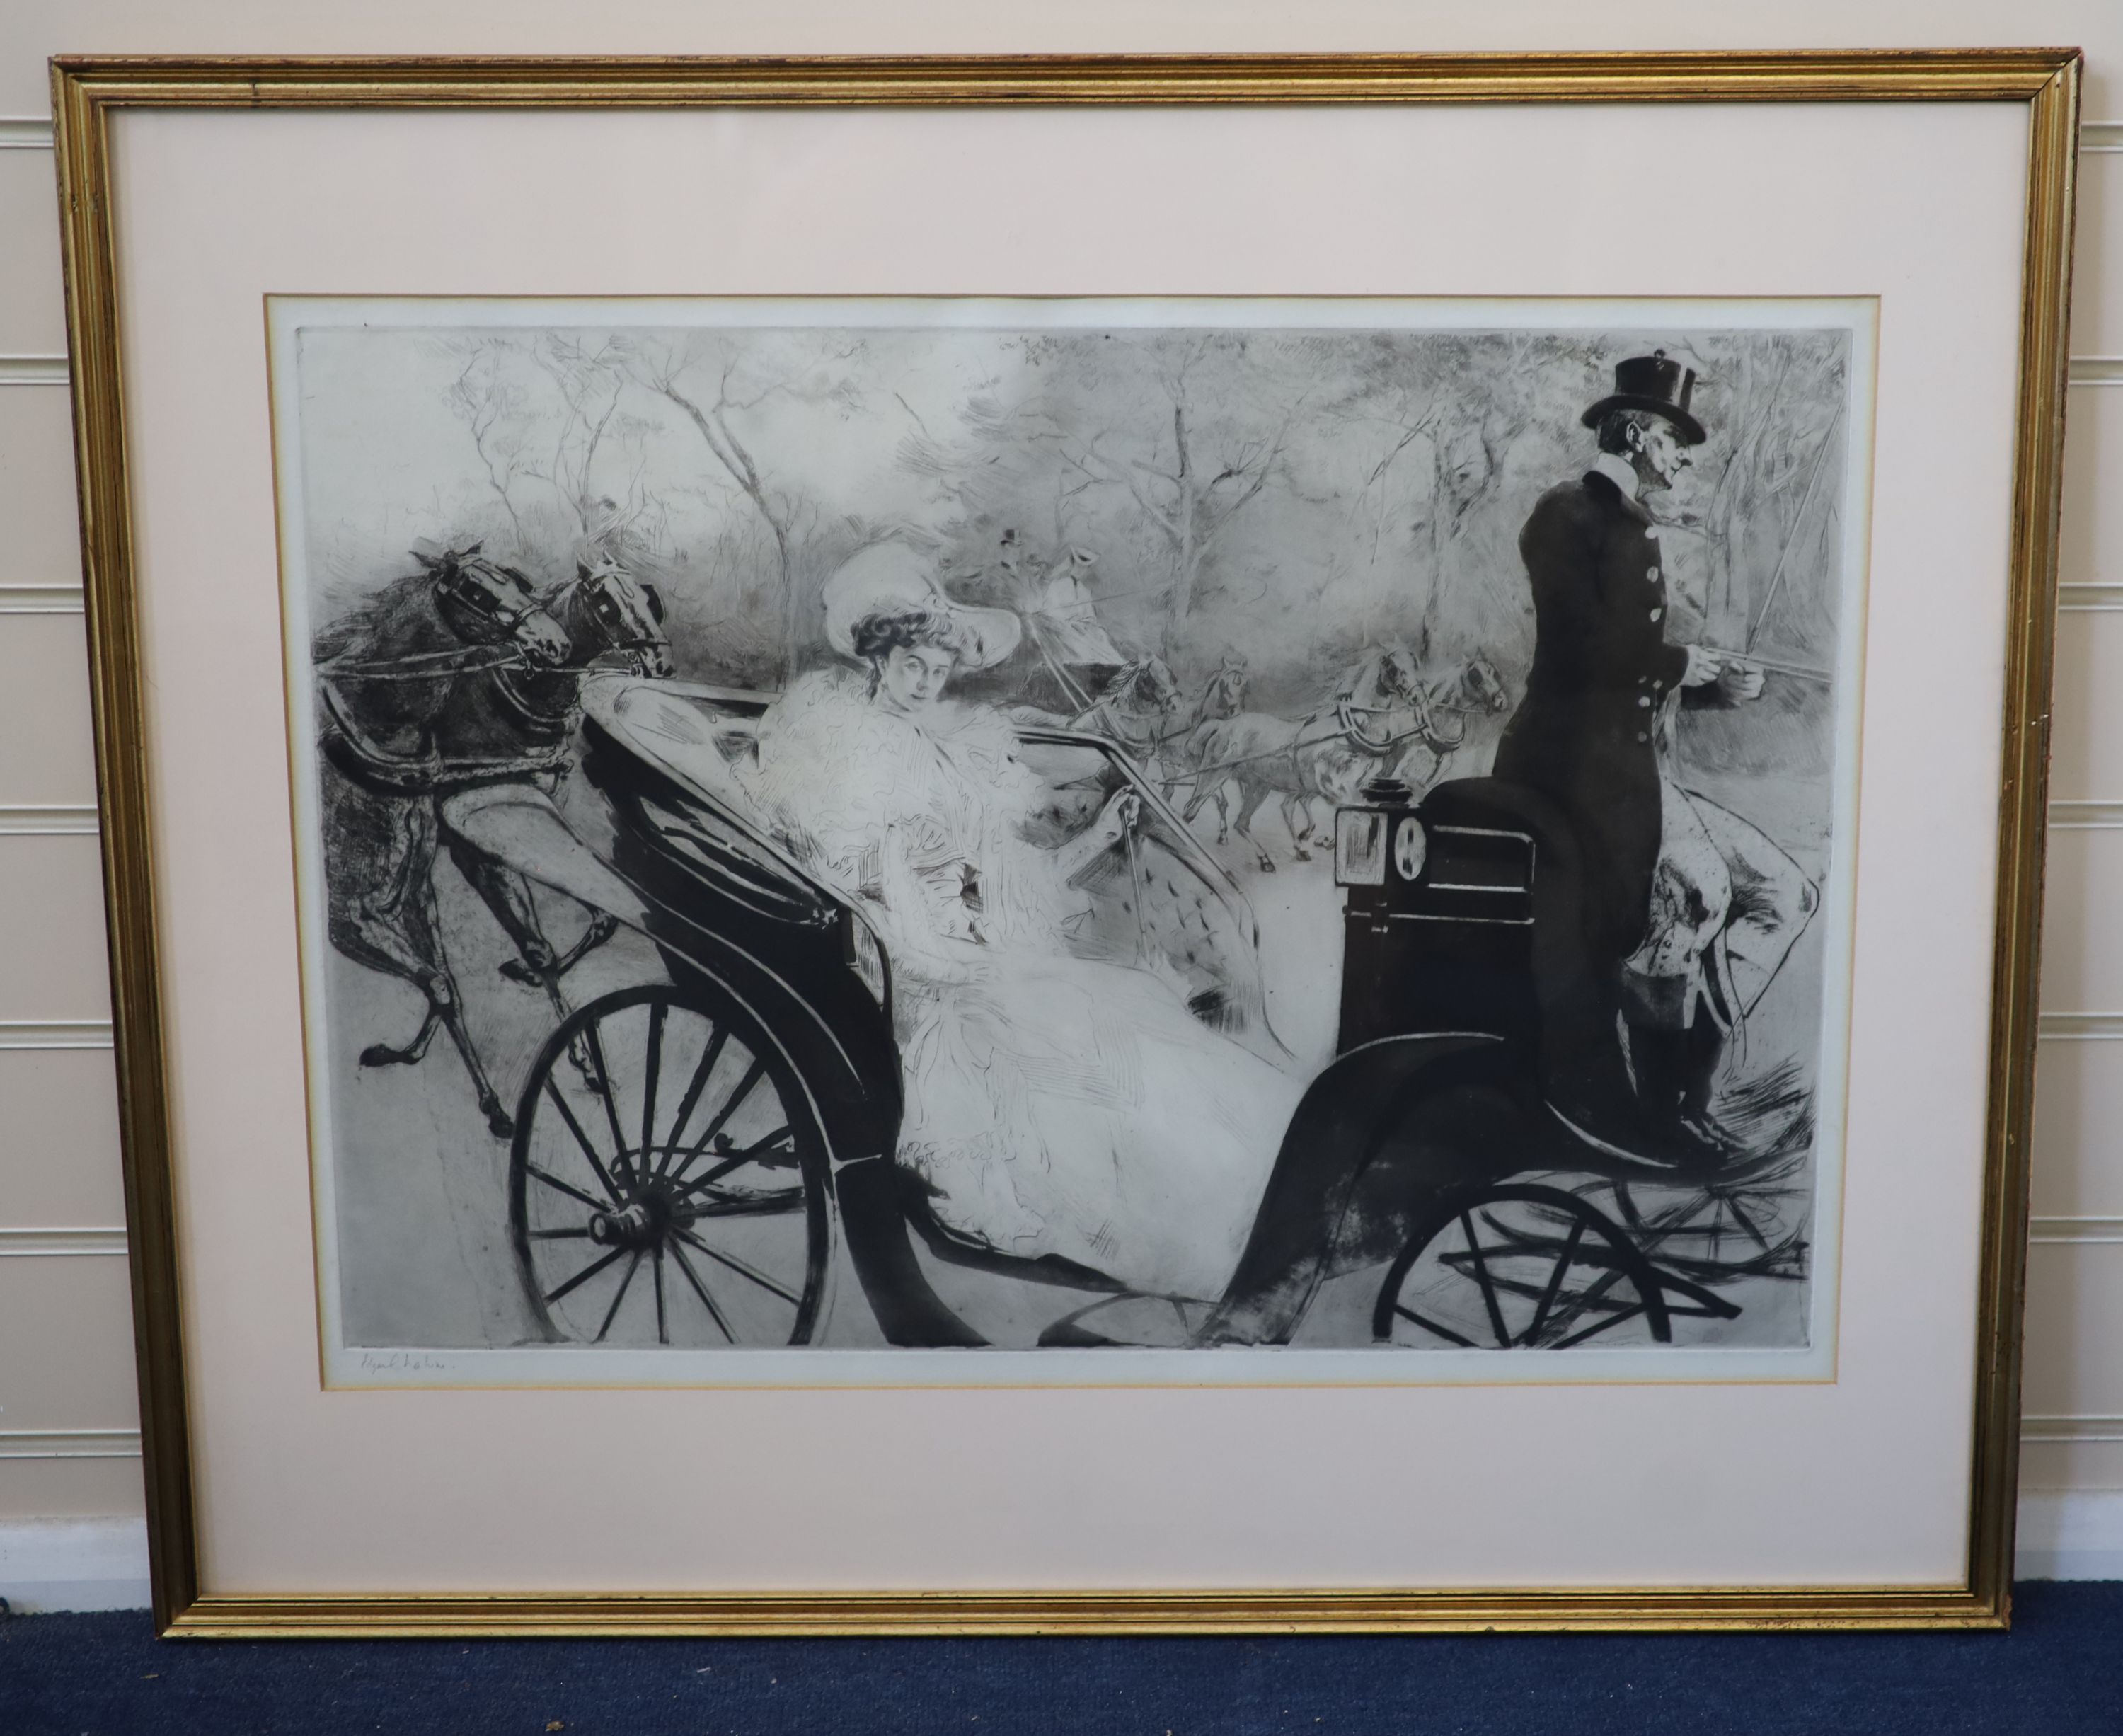 Edgar Chahine (1874-1947), drypoint etching, La Promenade, signed in pencil 1902, from the edition of 100, 46 x 66cm